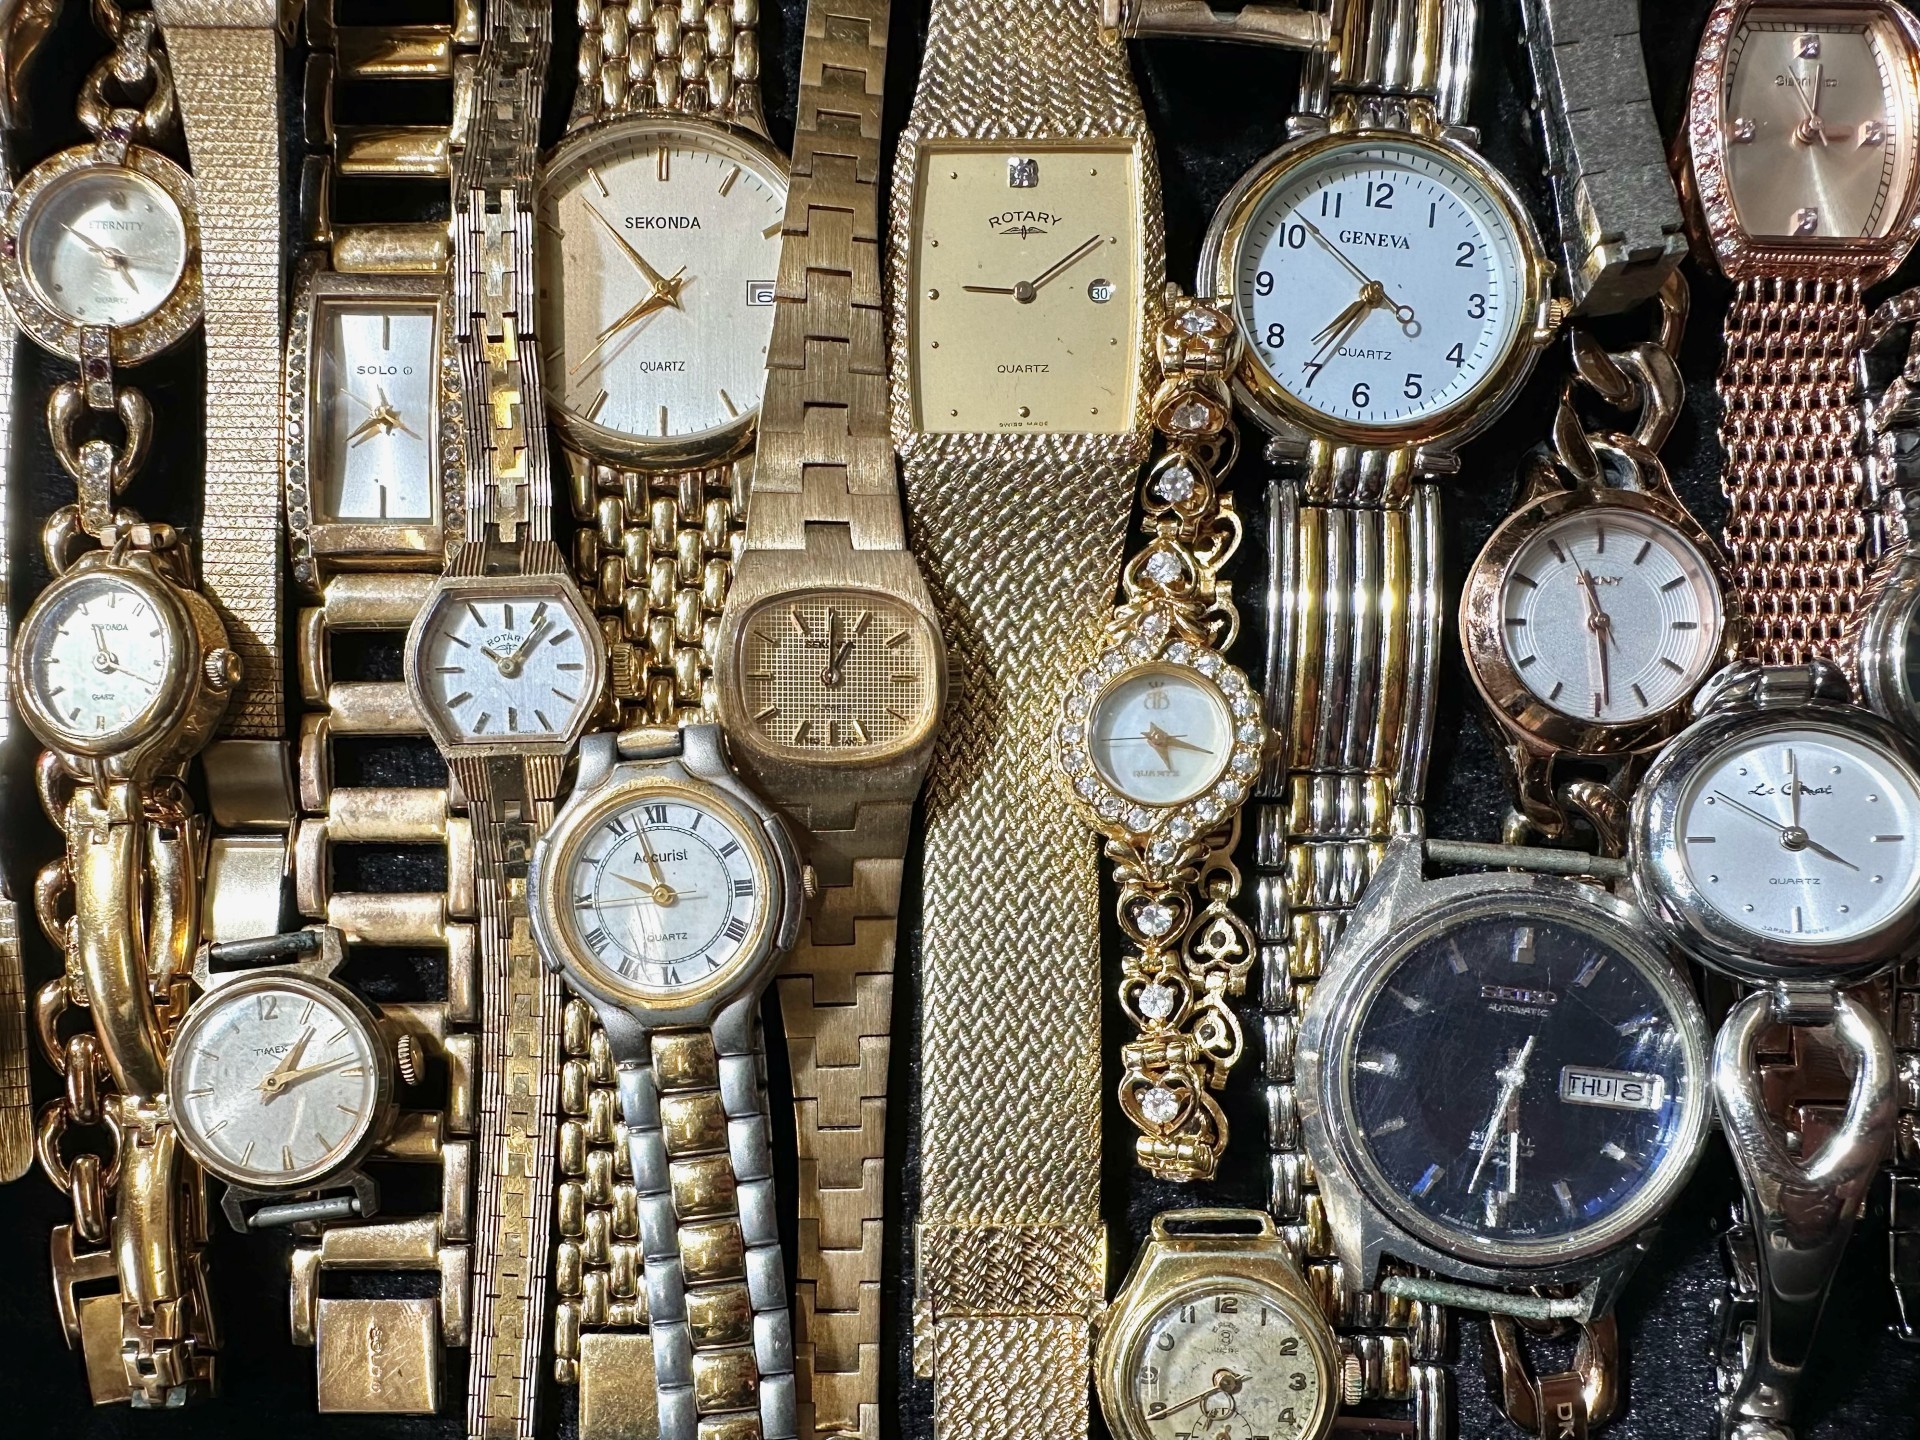 Collection of Ladies & Gentlemen's Wristwatches, leather and bracelet straps, various makes - Image 3 of 4